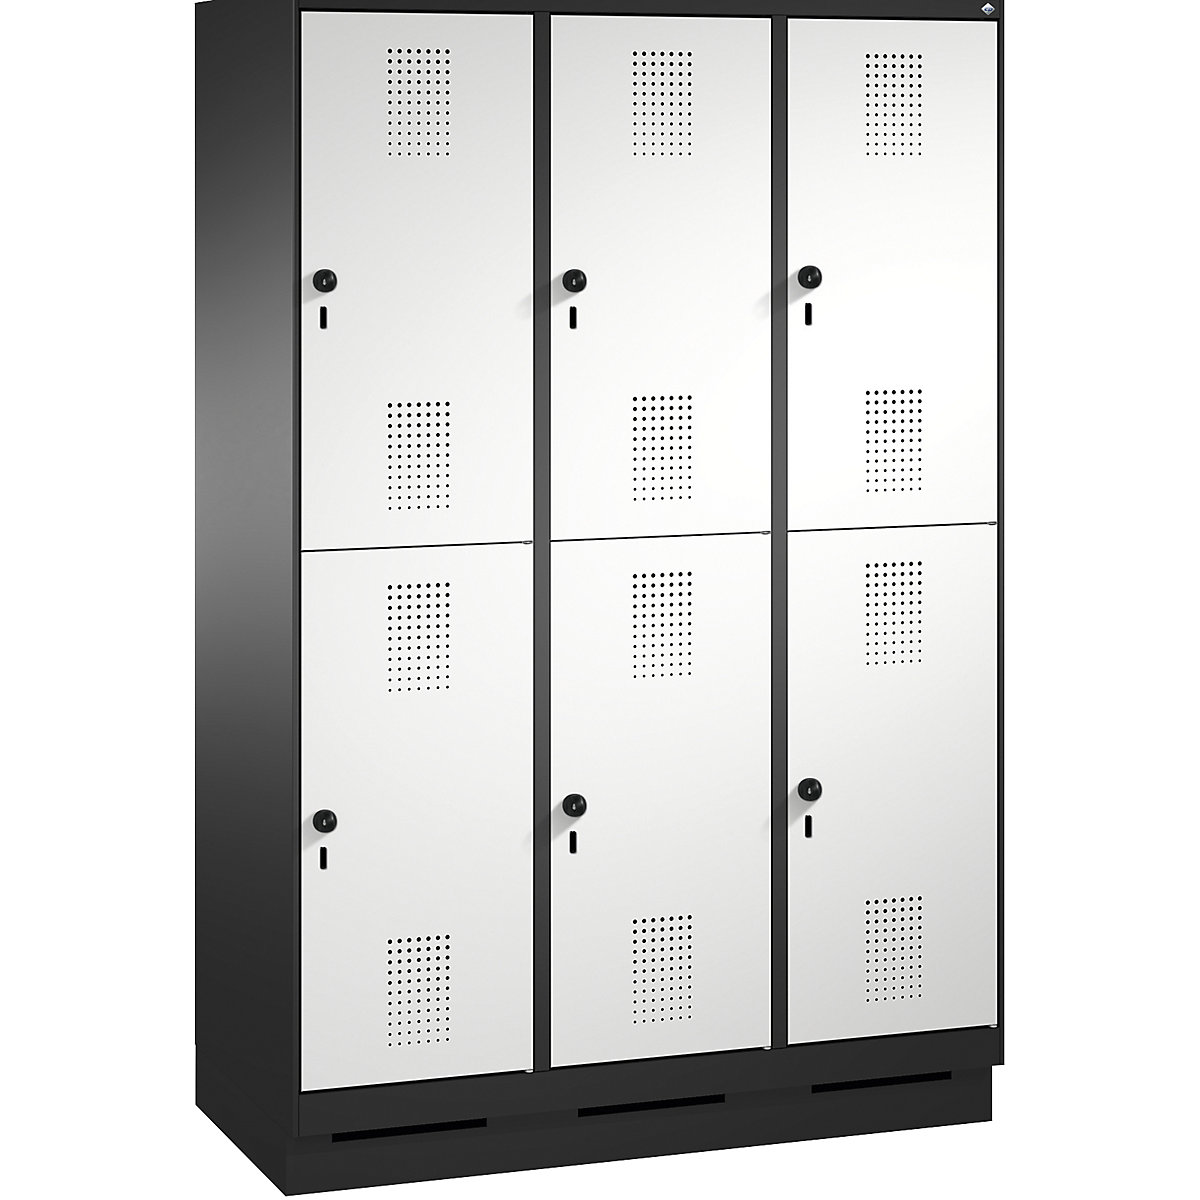 EVOLO cloakroom locker, double tier, with plinth – C+P, 3 compartments, 2 shelf compartments each, compartment width 400 mm, black grey / light grey-5